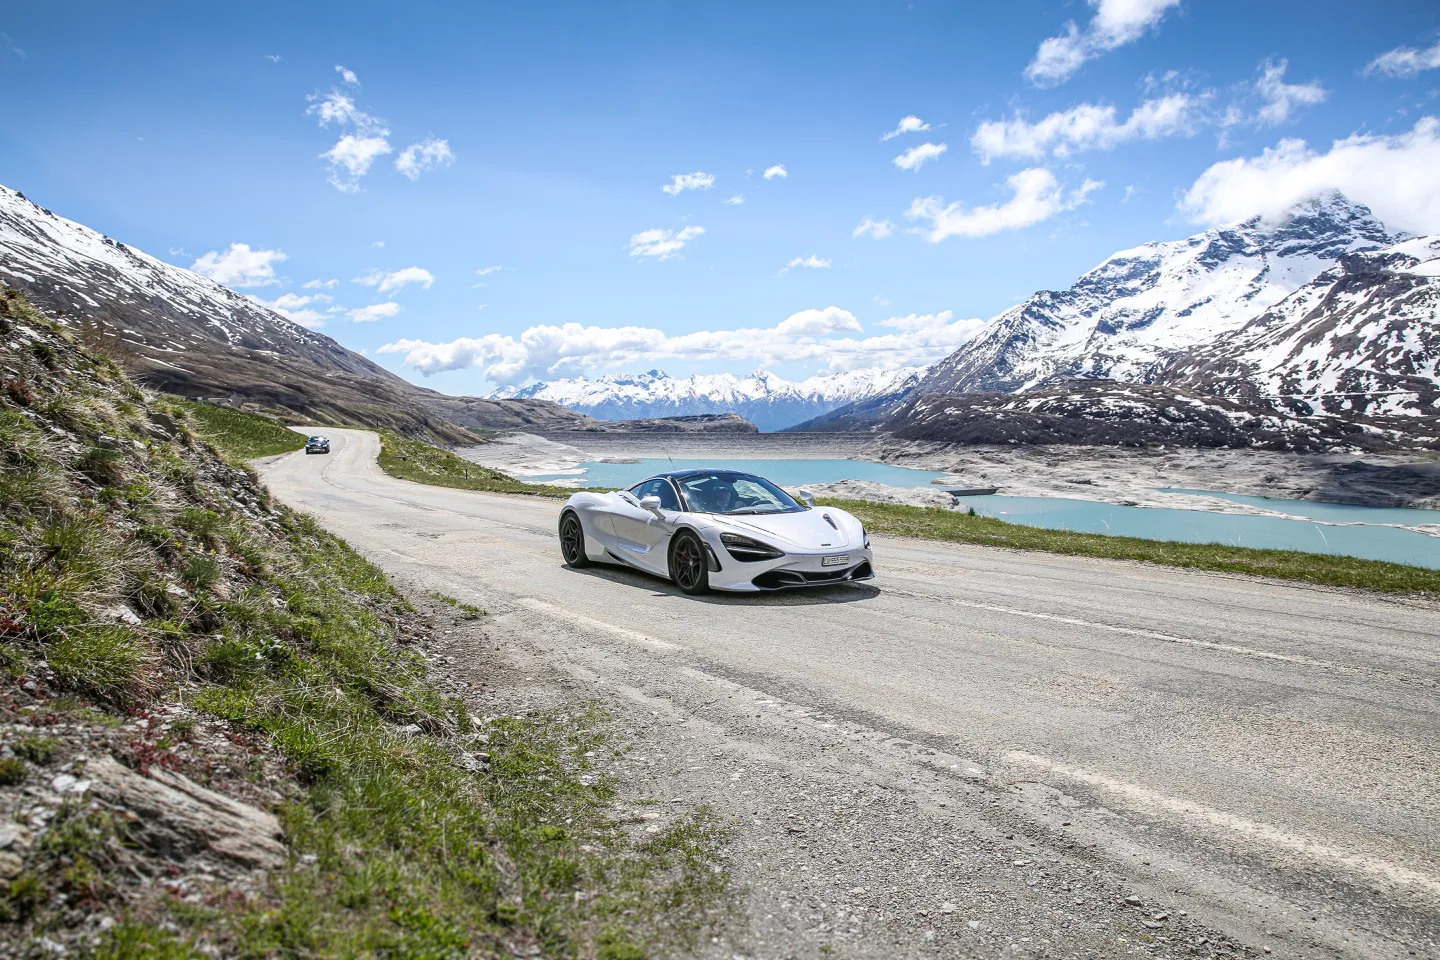 Drive a fleet of supercars in Europe on the ultimate luxury weekend escape